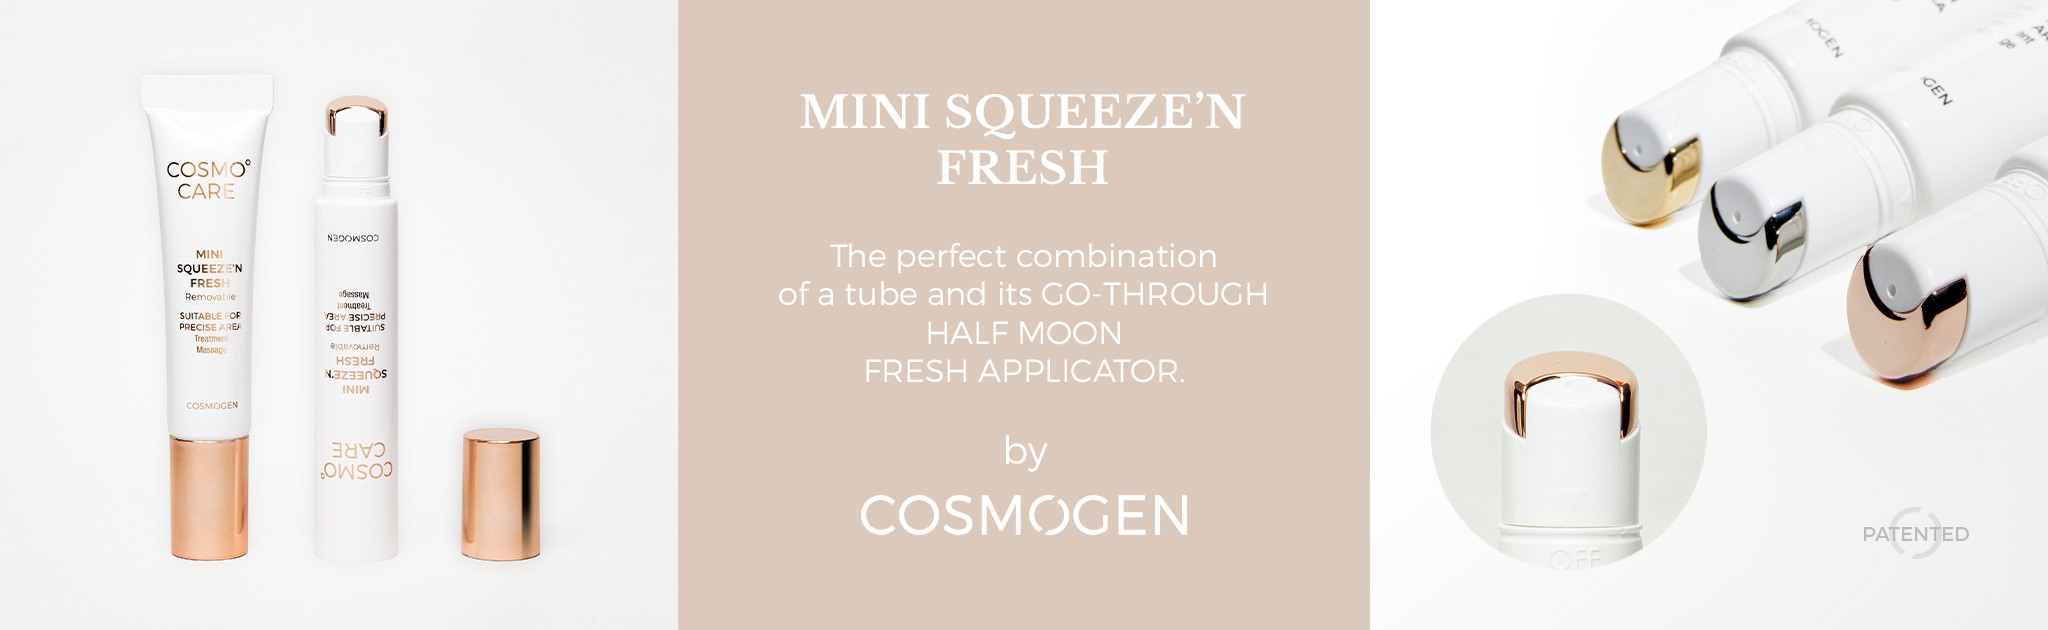 https://www.cosmogen.fr/mini-squeeze-n-fresh-round-removable.html?search_query=fresh&results=24